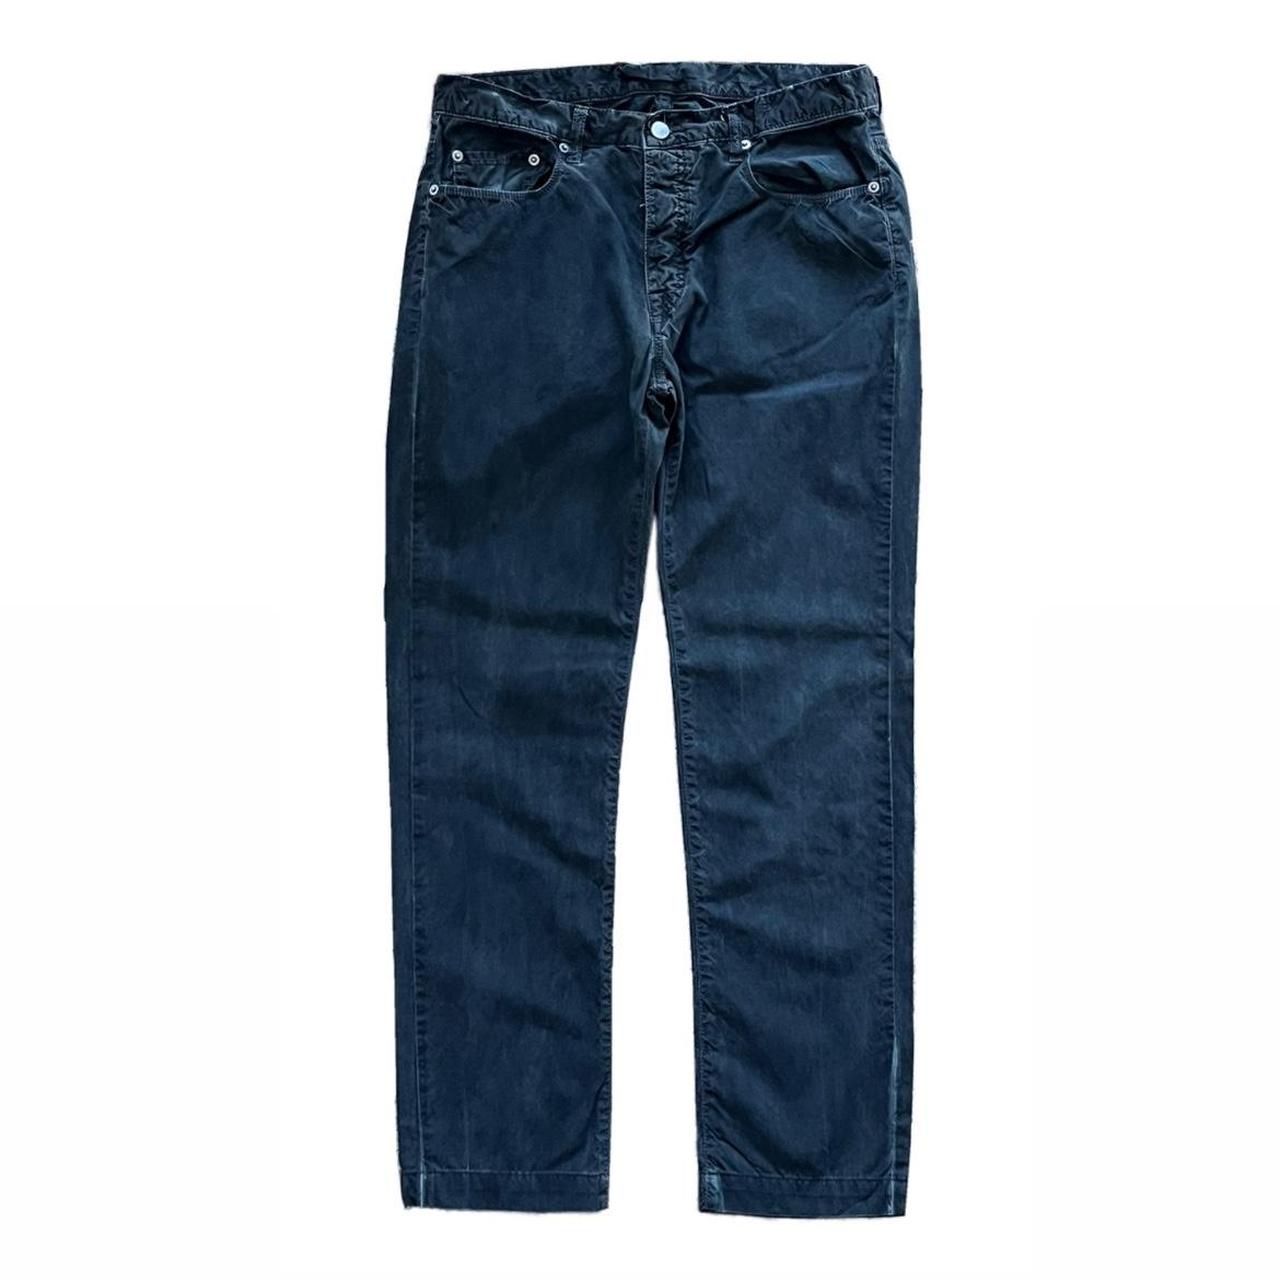 Massimo Alba Men's Blue and Navy Jeans